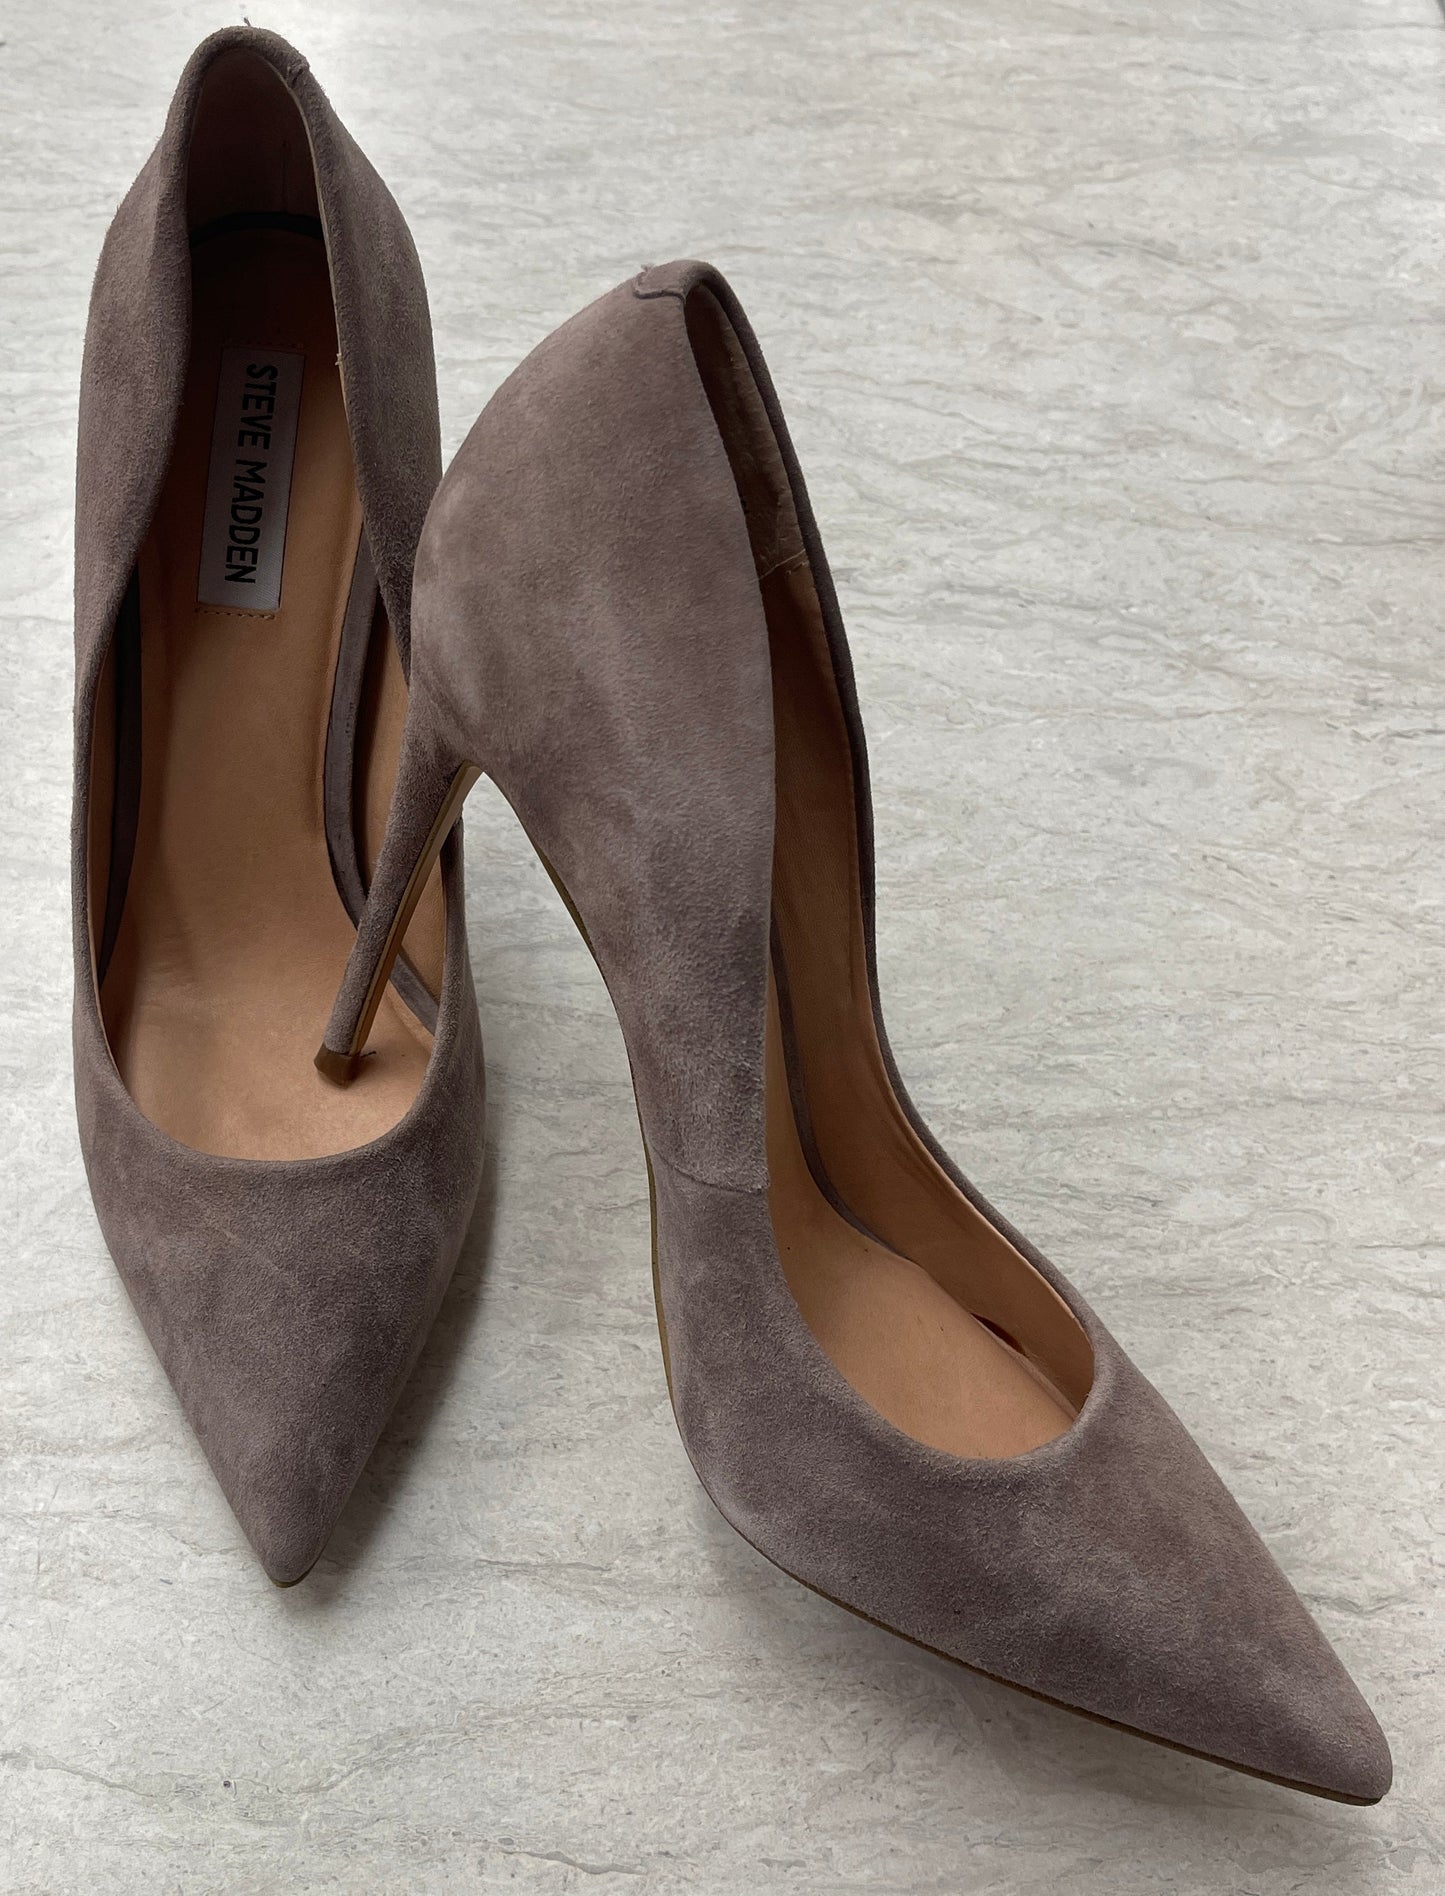 Taupe Shoes Heels Stiletto Steve Madden, Size 10